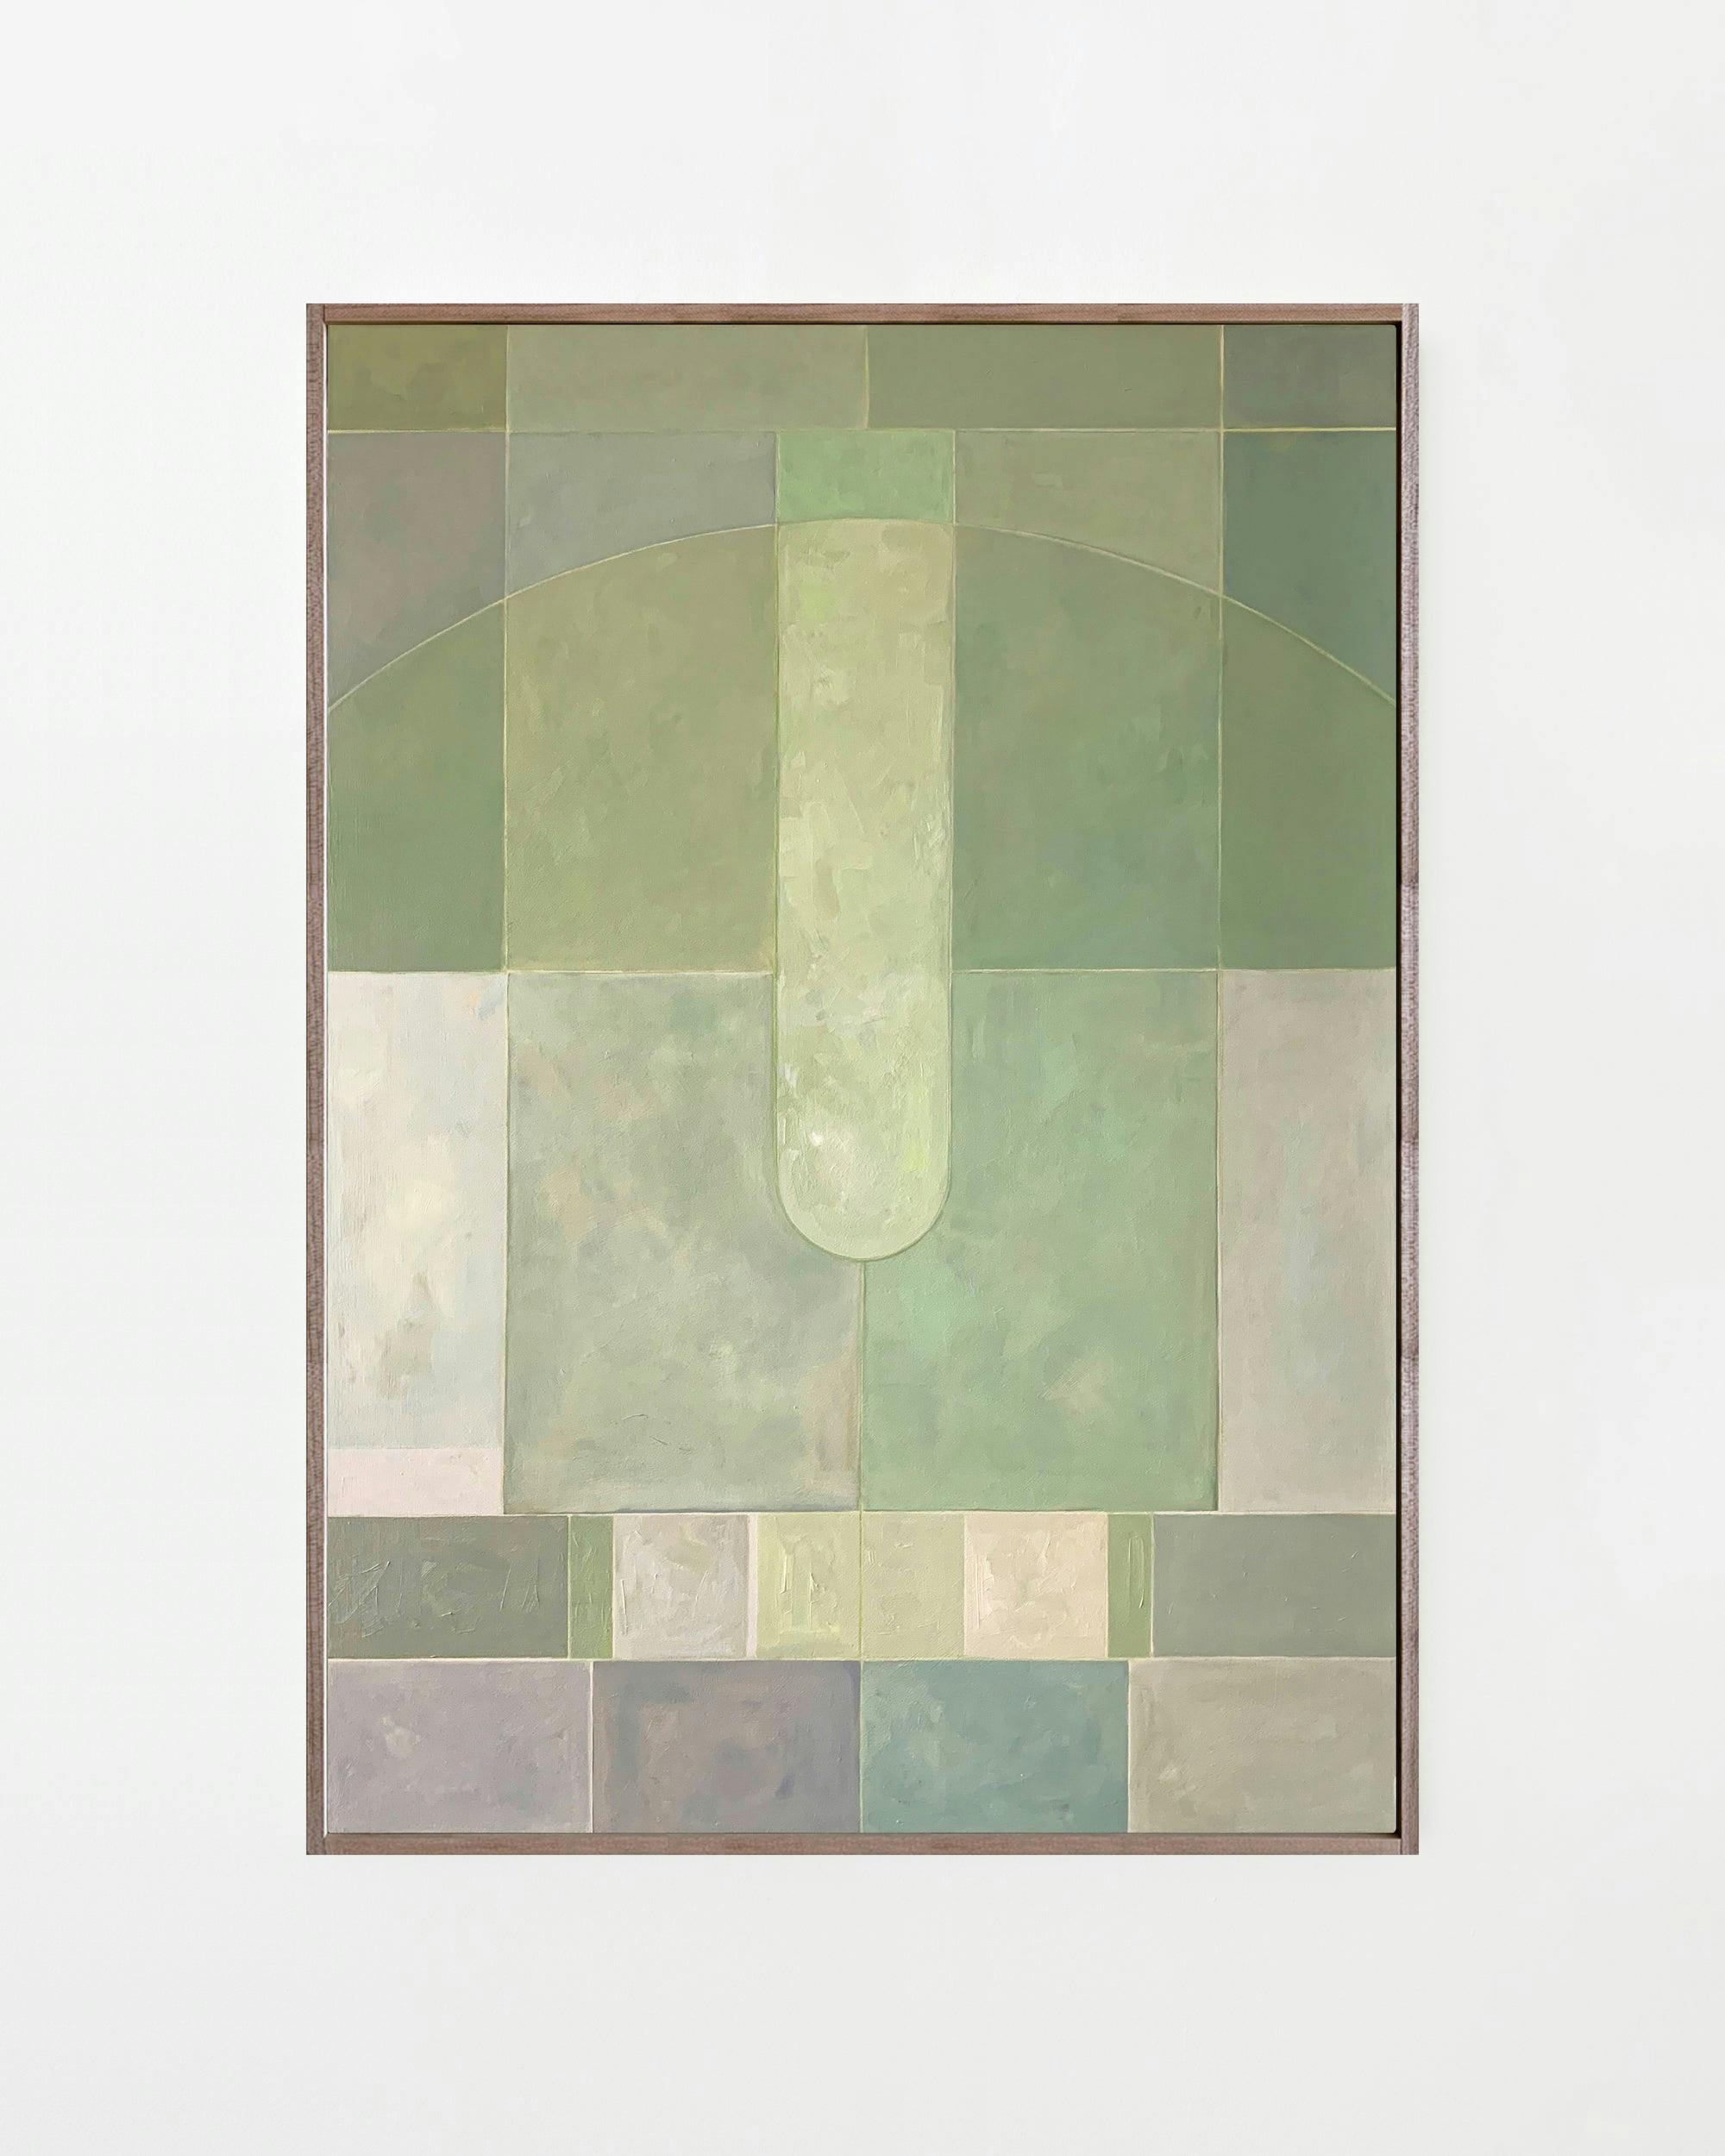 Painting by Carla Weeks titled "Big Window in Lichen Green".